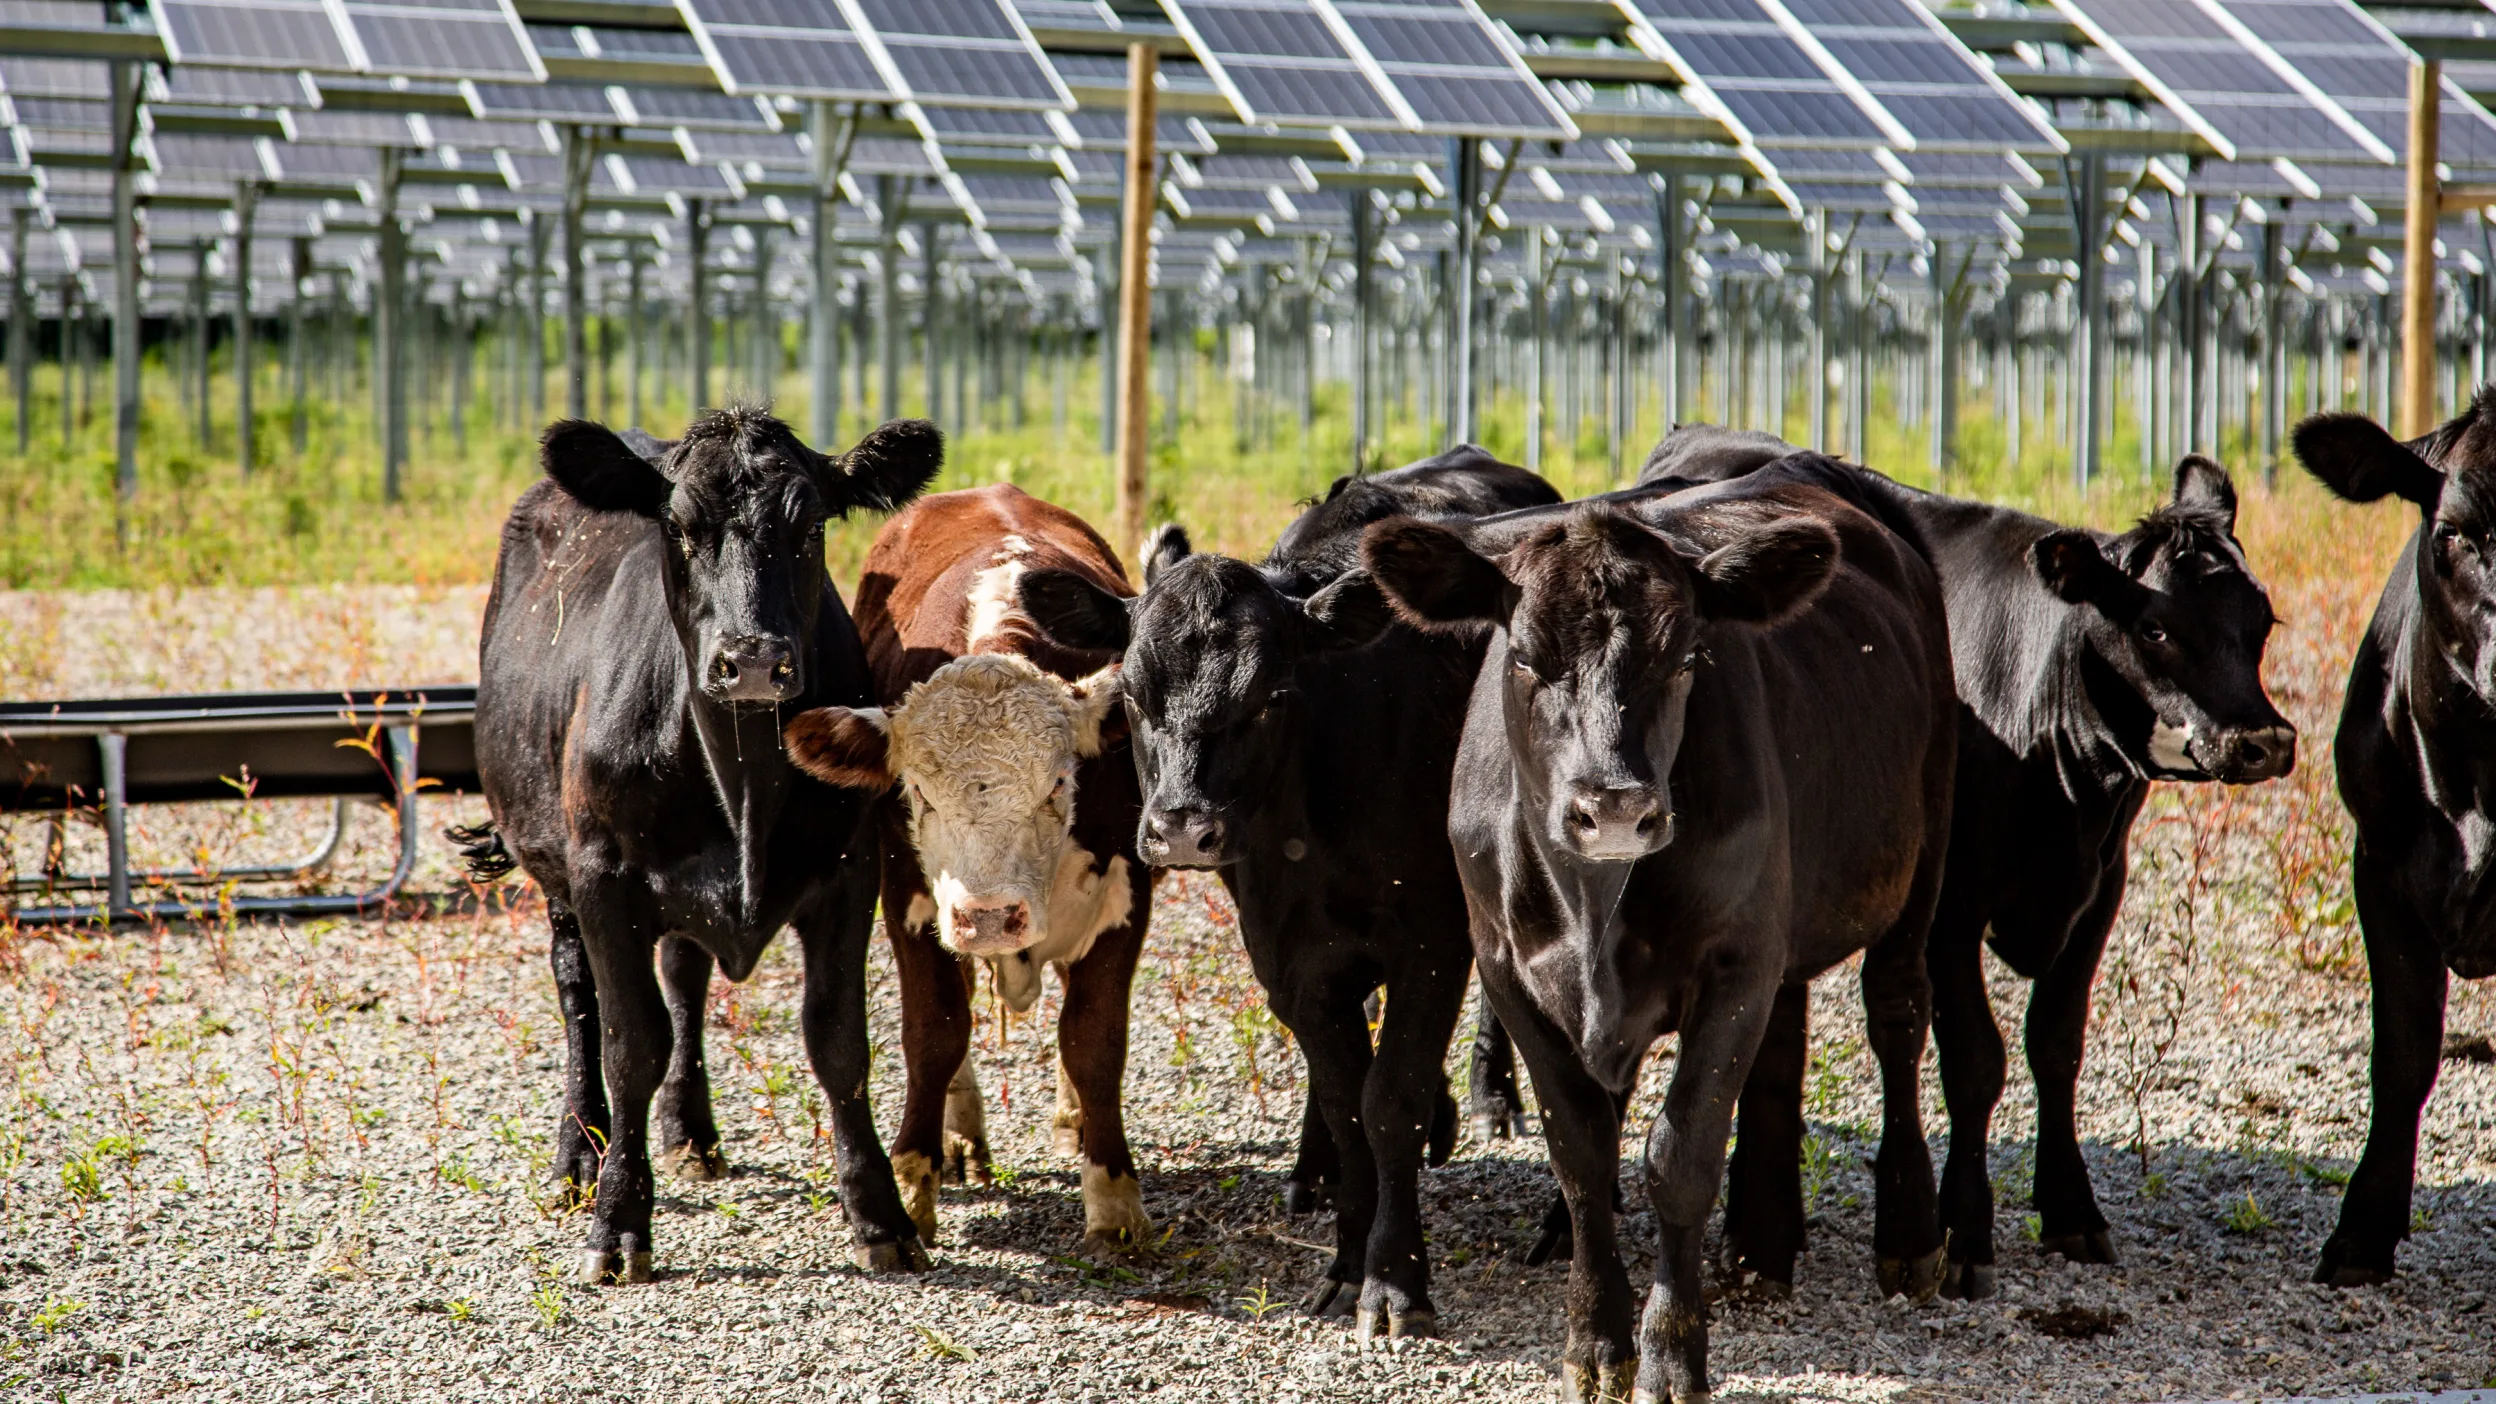 A group of six black and brown cows standing in front of solar racks